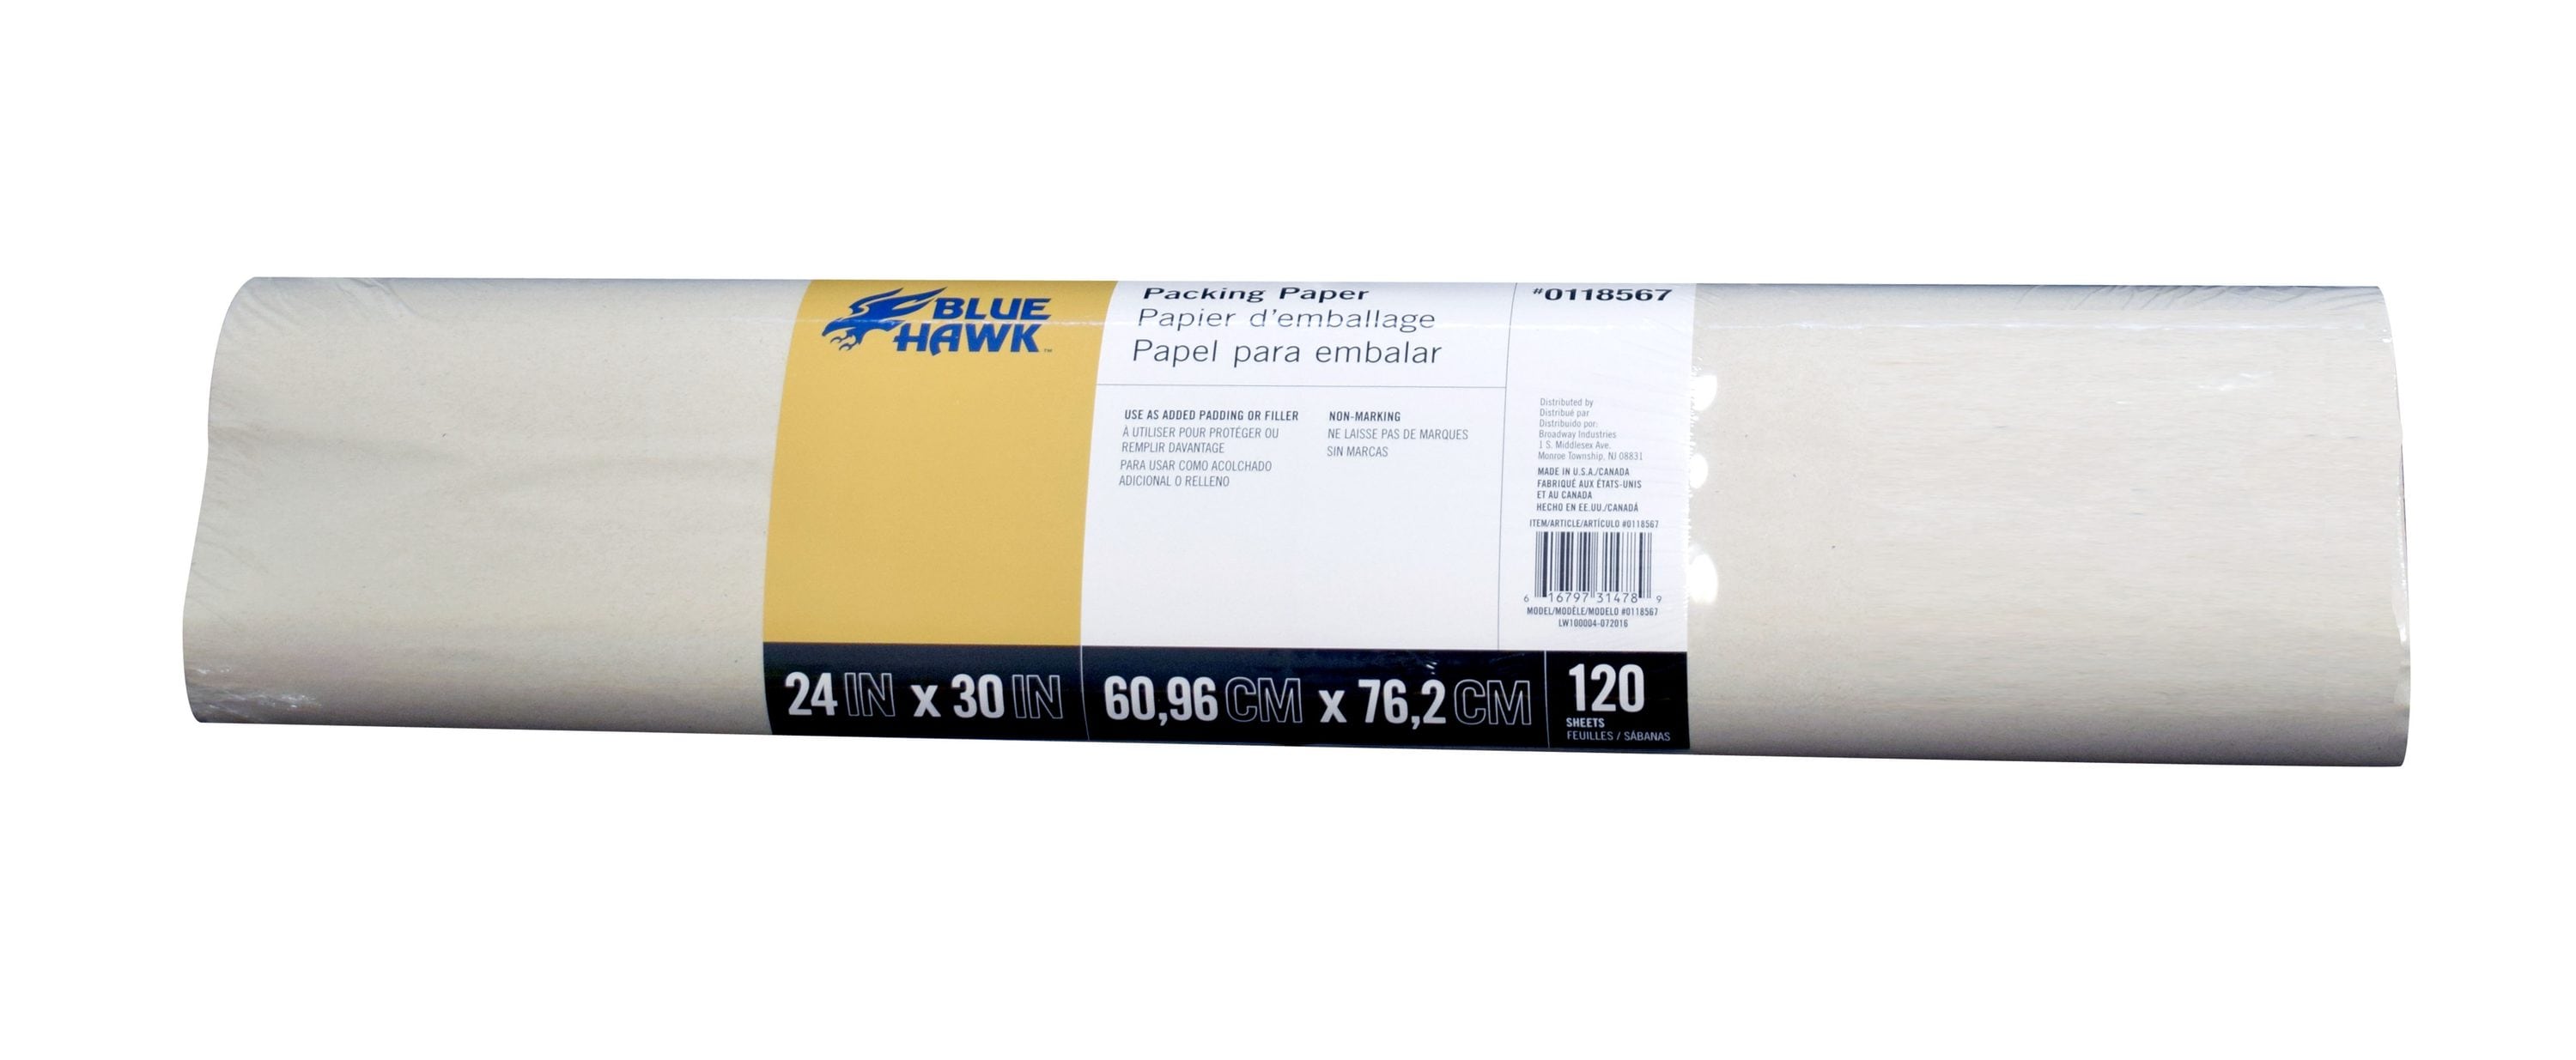 Duck Brand Newsprint Packing Paper for Moving and Storage, 480